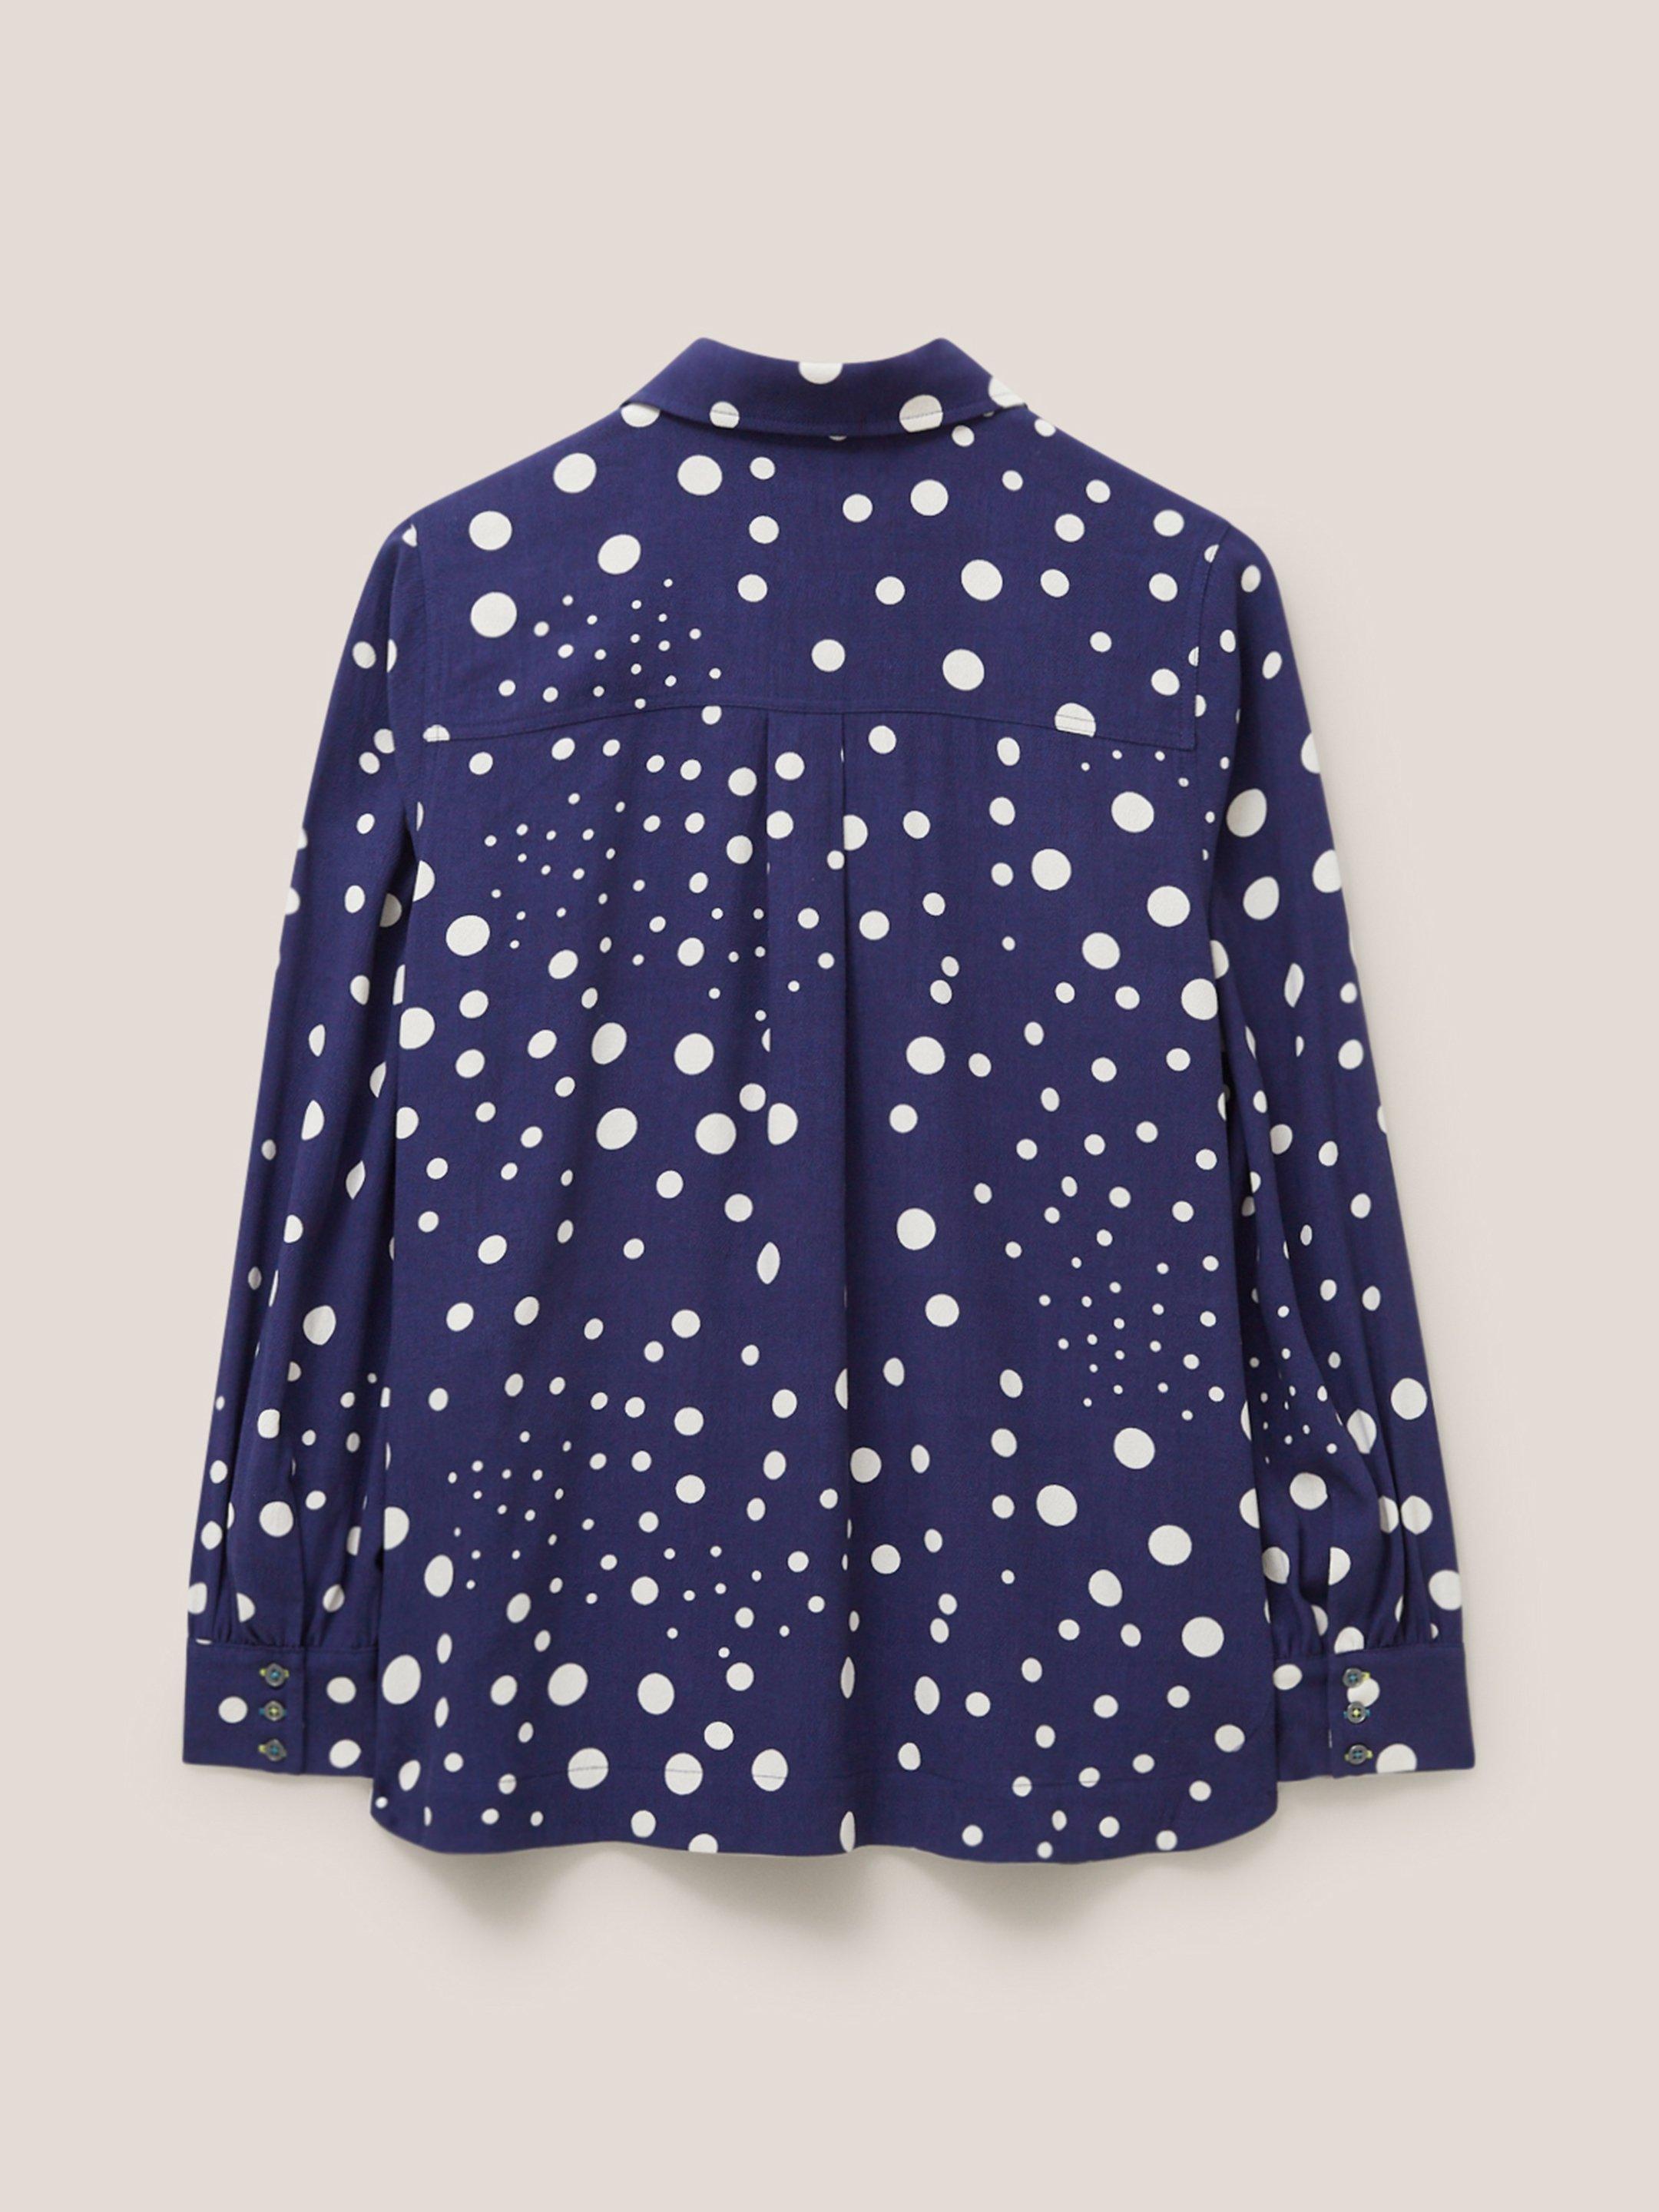 Ella Relaxed Shirt in NAVY MULTI - FLAT BACK